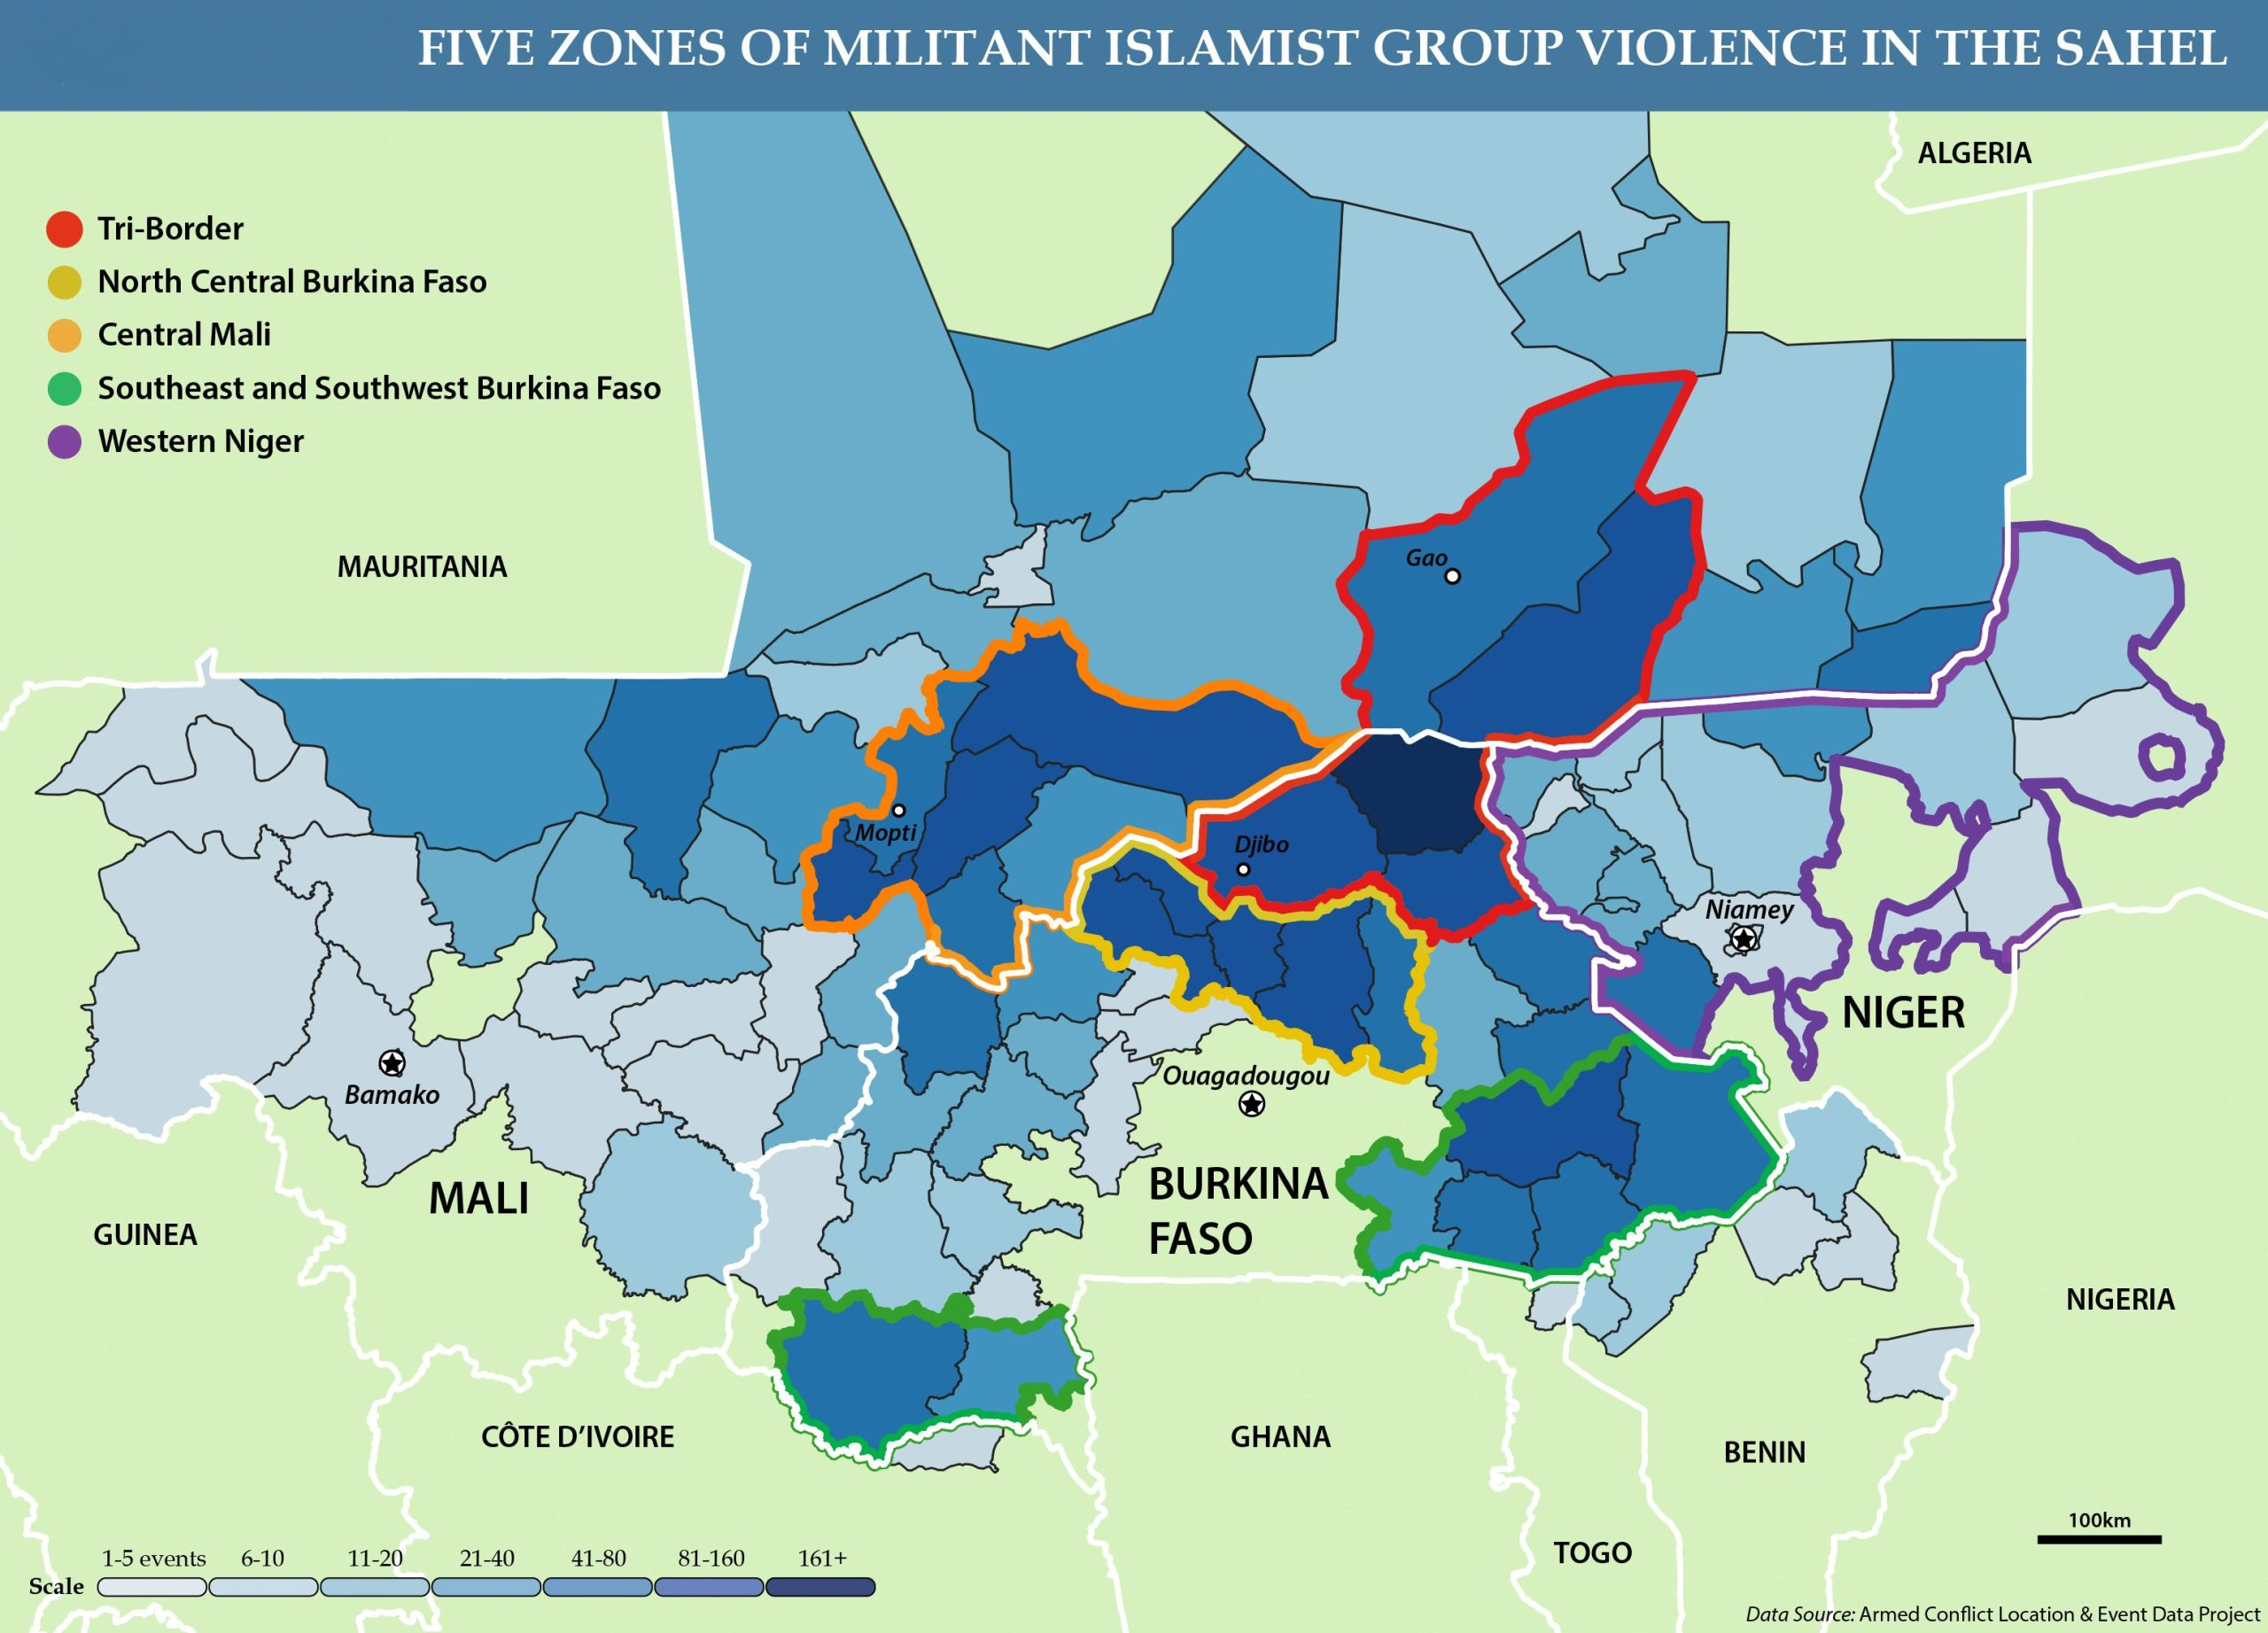 Five Zones of Militant Islamist Violence in the Sahel